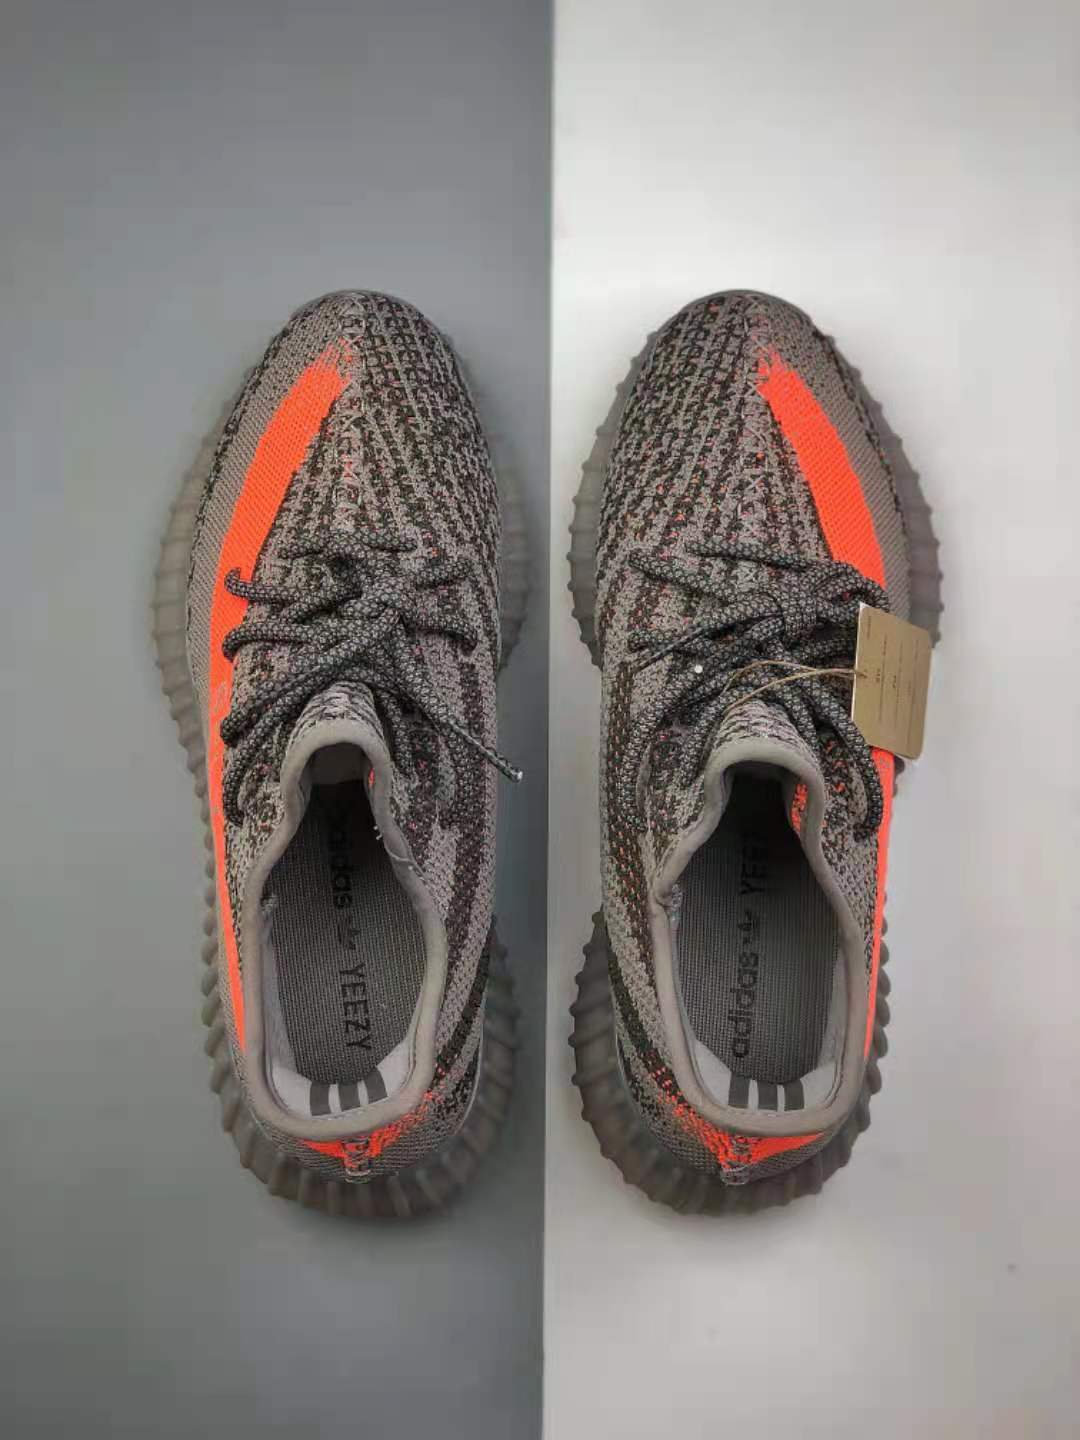 Adidas Yeezy Boost 350 V2 'Beluga Reflective' GW1229 - Stylish and Reflective Footwear Available Now!